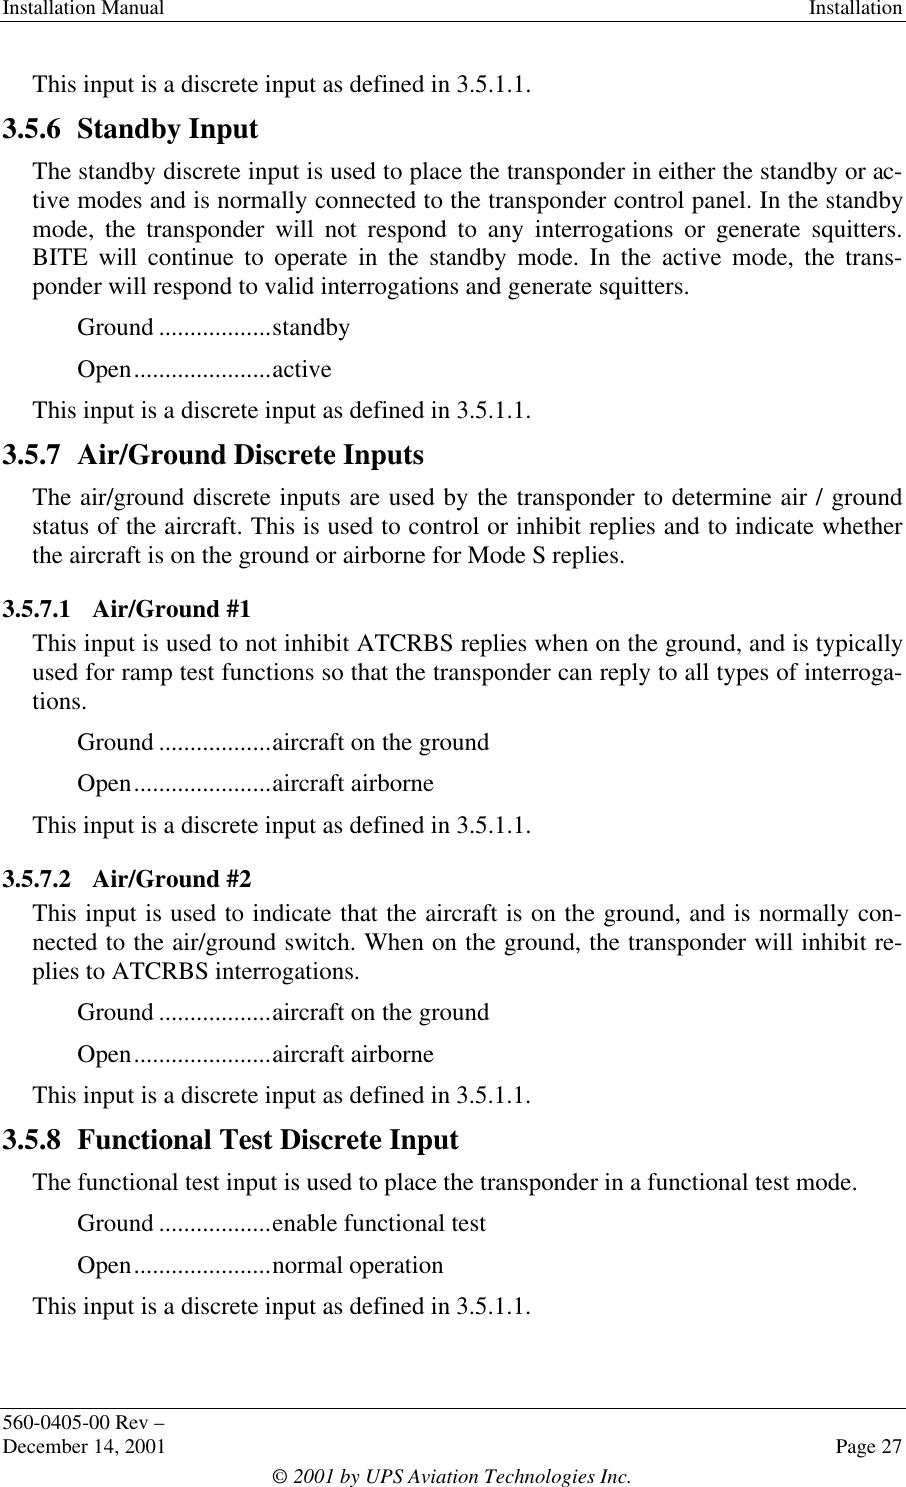 Installation Manual Installation560-0405-00 Rev –December 14, 2001 Page 27© 2001 by UPS Aviation Technologies Inc.This input is a discrete input as defined in 3.5.1.1.3.5.6 Standby InputThe standby discrete input is used to place the transponder in either the standby or ac-tive modes and is normally connected to the transponder control panel. In the standbymode, the transponder will not respond to any interrogations or generate squitters.BITE will continue to operate in the standby mode. In the active mode, the trans-ponder will respond to valid interrogations and generate squitters.Ground ..................standbyOpen......................activeThis input is a discrete input as defined in 3.5.1.1.3.5.7 Air/Ground Discrete InputsThe air/ground discrete inputs are used by the transponder to determine air / groundstatus of the aircraft. This is used to control or inhibit replies and to indicate whetherthe aircraft is on the ground or airborne for Mode S replies.3.5.7.1 Air/Ground #1This input is used to not inhibit ATCRBS replies when on the ground, and is typicallyused for ramp test functions so that the transponder can reply to all types of interroga-tions.Ground ..................aircraft on the groundOpen......................aircraft airborneThis input is a discrete input as defined in 3.5.1.1.3.5.7.2 Air/Ground #2This input is used to indicate that the aircraft is on the ground, and is normally con-nected to the air/ground switch. When on the ground, the transponder will inhibit re-plies to ATCRBS interrogations.Ground ..................aircraft on the groundOpen......................aircraft airborneThis input is a discrete input as defined in 3.5.1.1.3.5.8 Functional Test Discrete InputThe functional test input is used to place the transponder in a functional test mode.Ground ..................enable functional testOpen......................normal operationThis input is a discrete input as defined in 3.5.1.1.